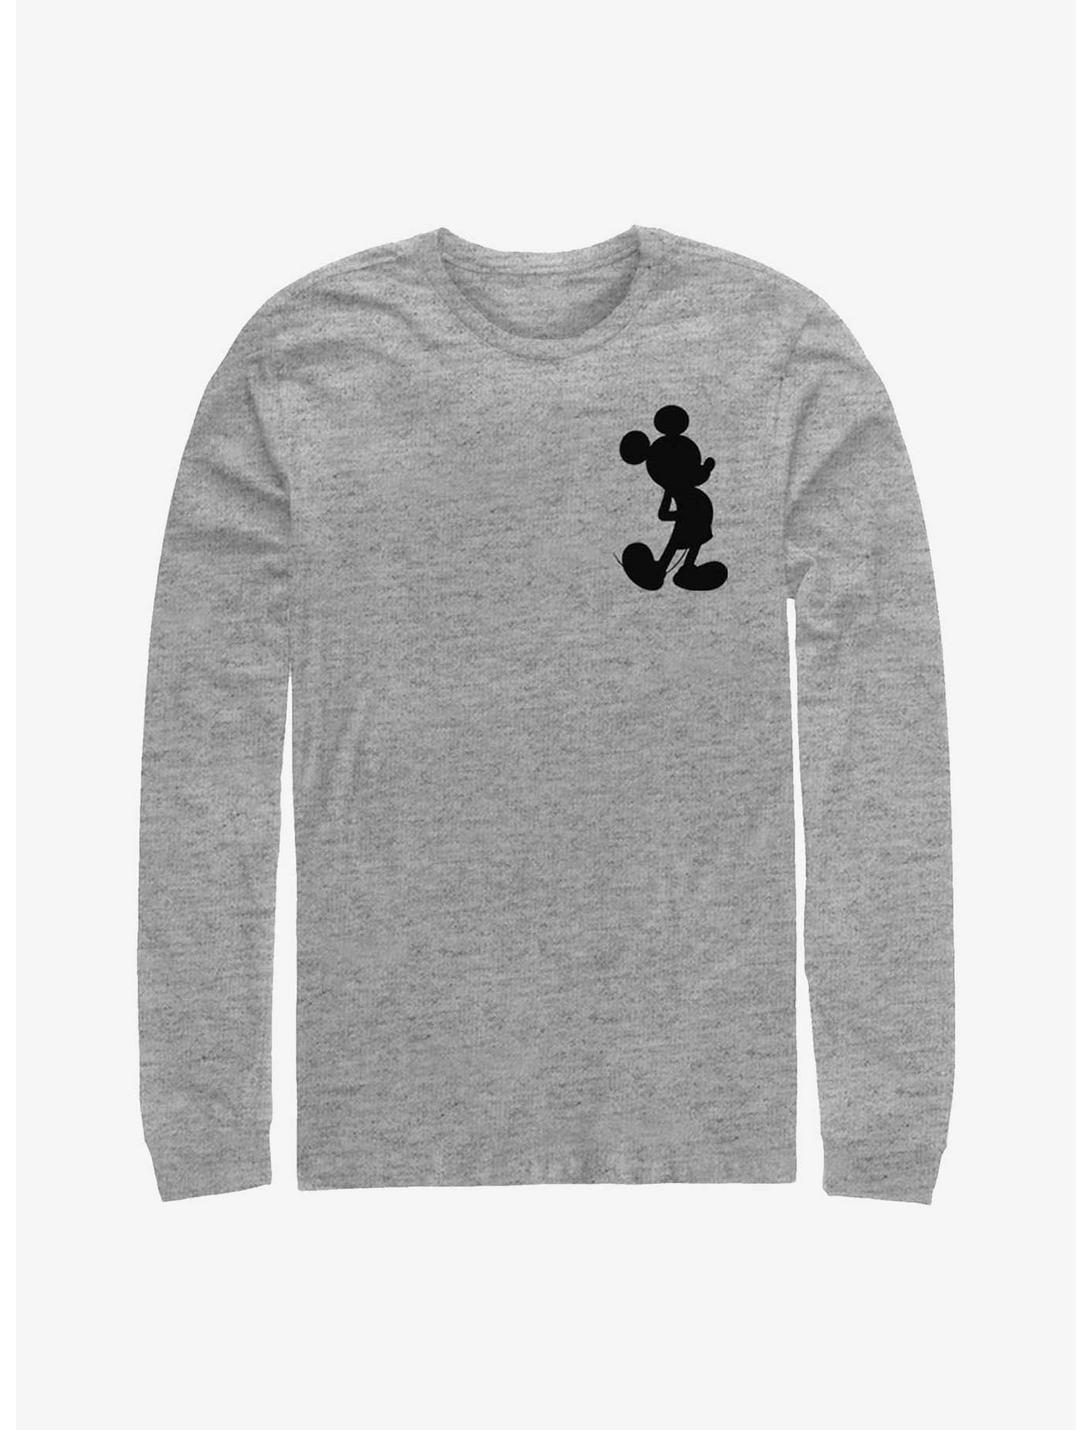 Disney Mickey Mouse Mickey Silhouette Long-Sleeve T-Shirt, ATH HTR, hi-res